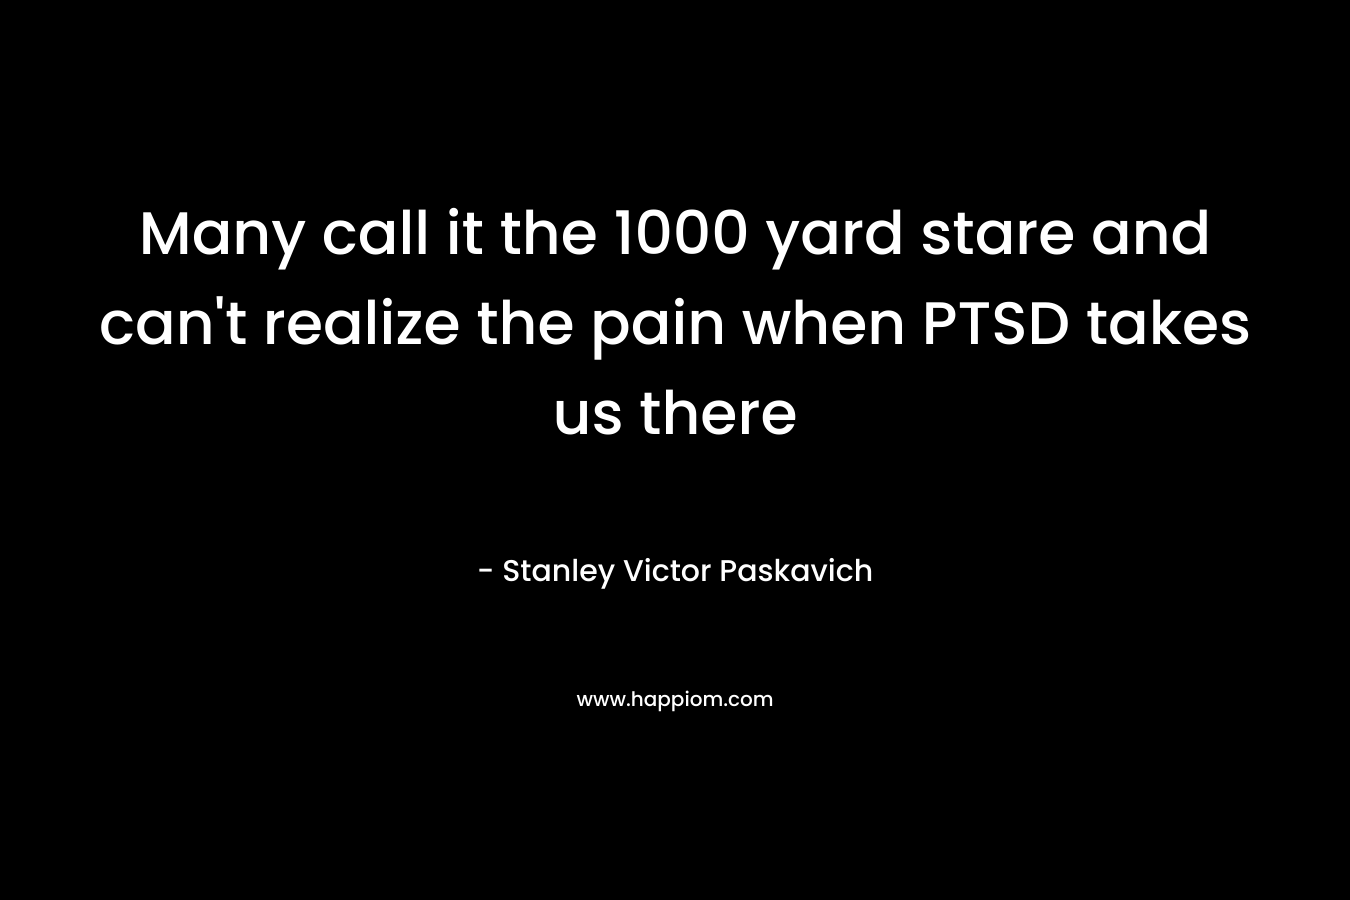 Many call it the 1000 yard stare and can't realize the pain when PTSD takes us there